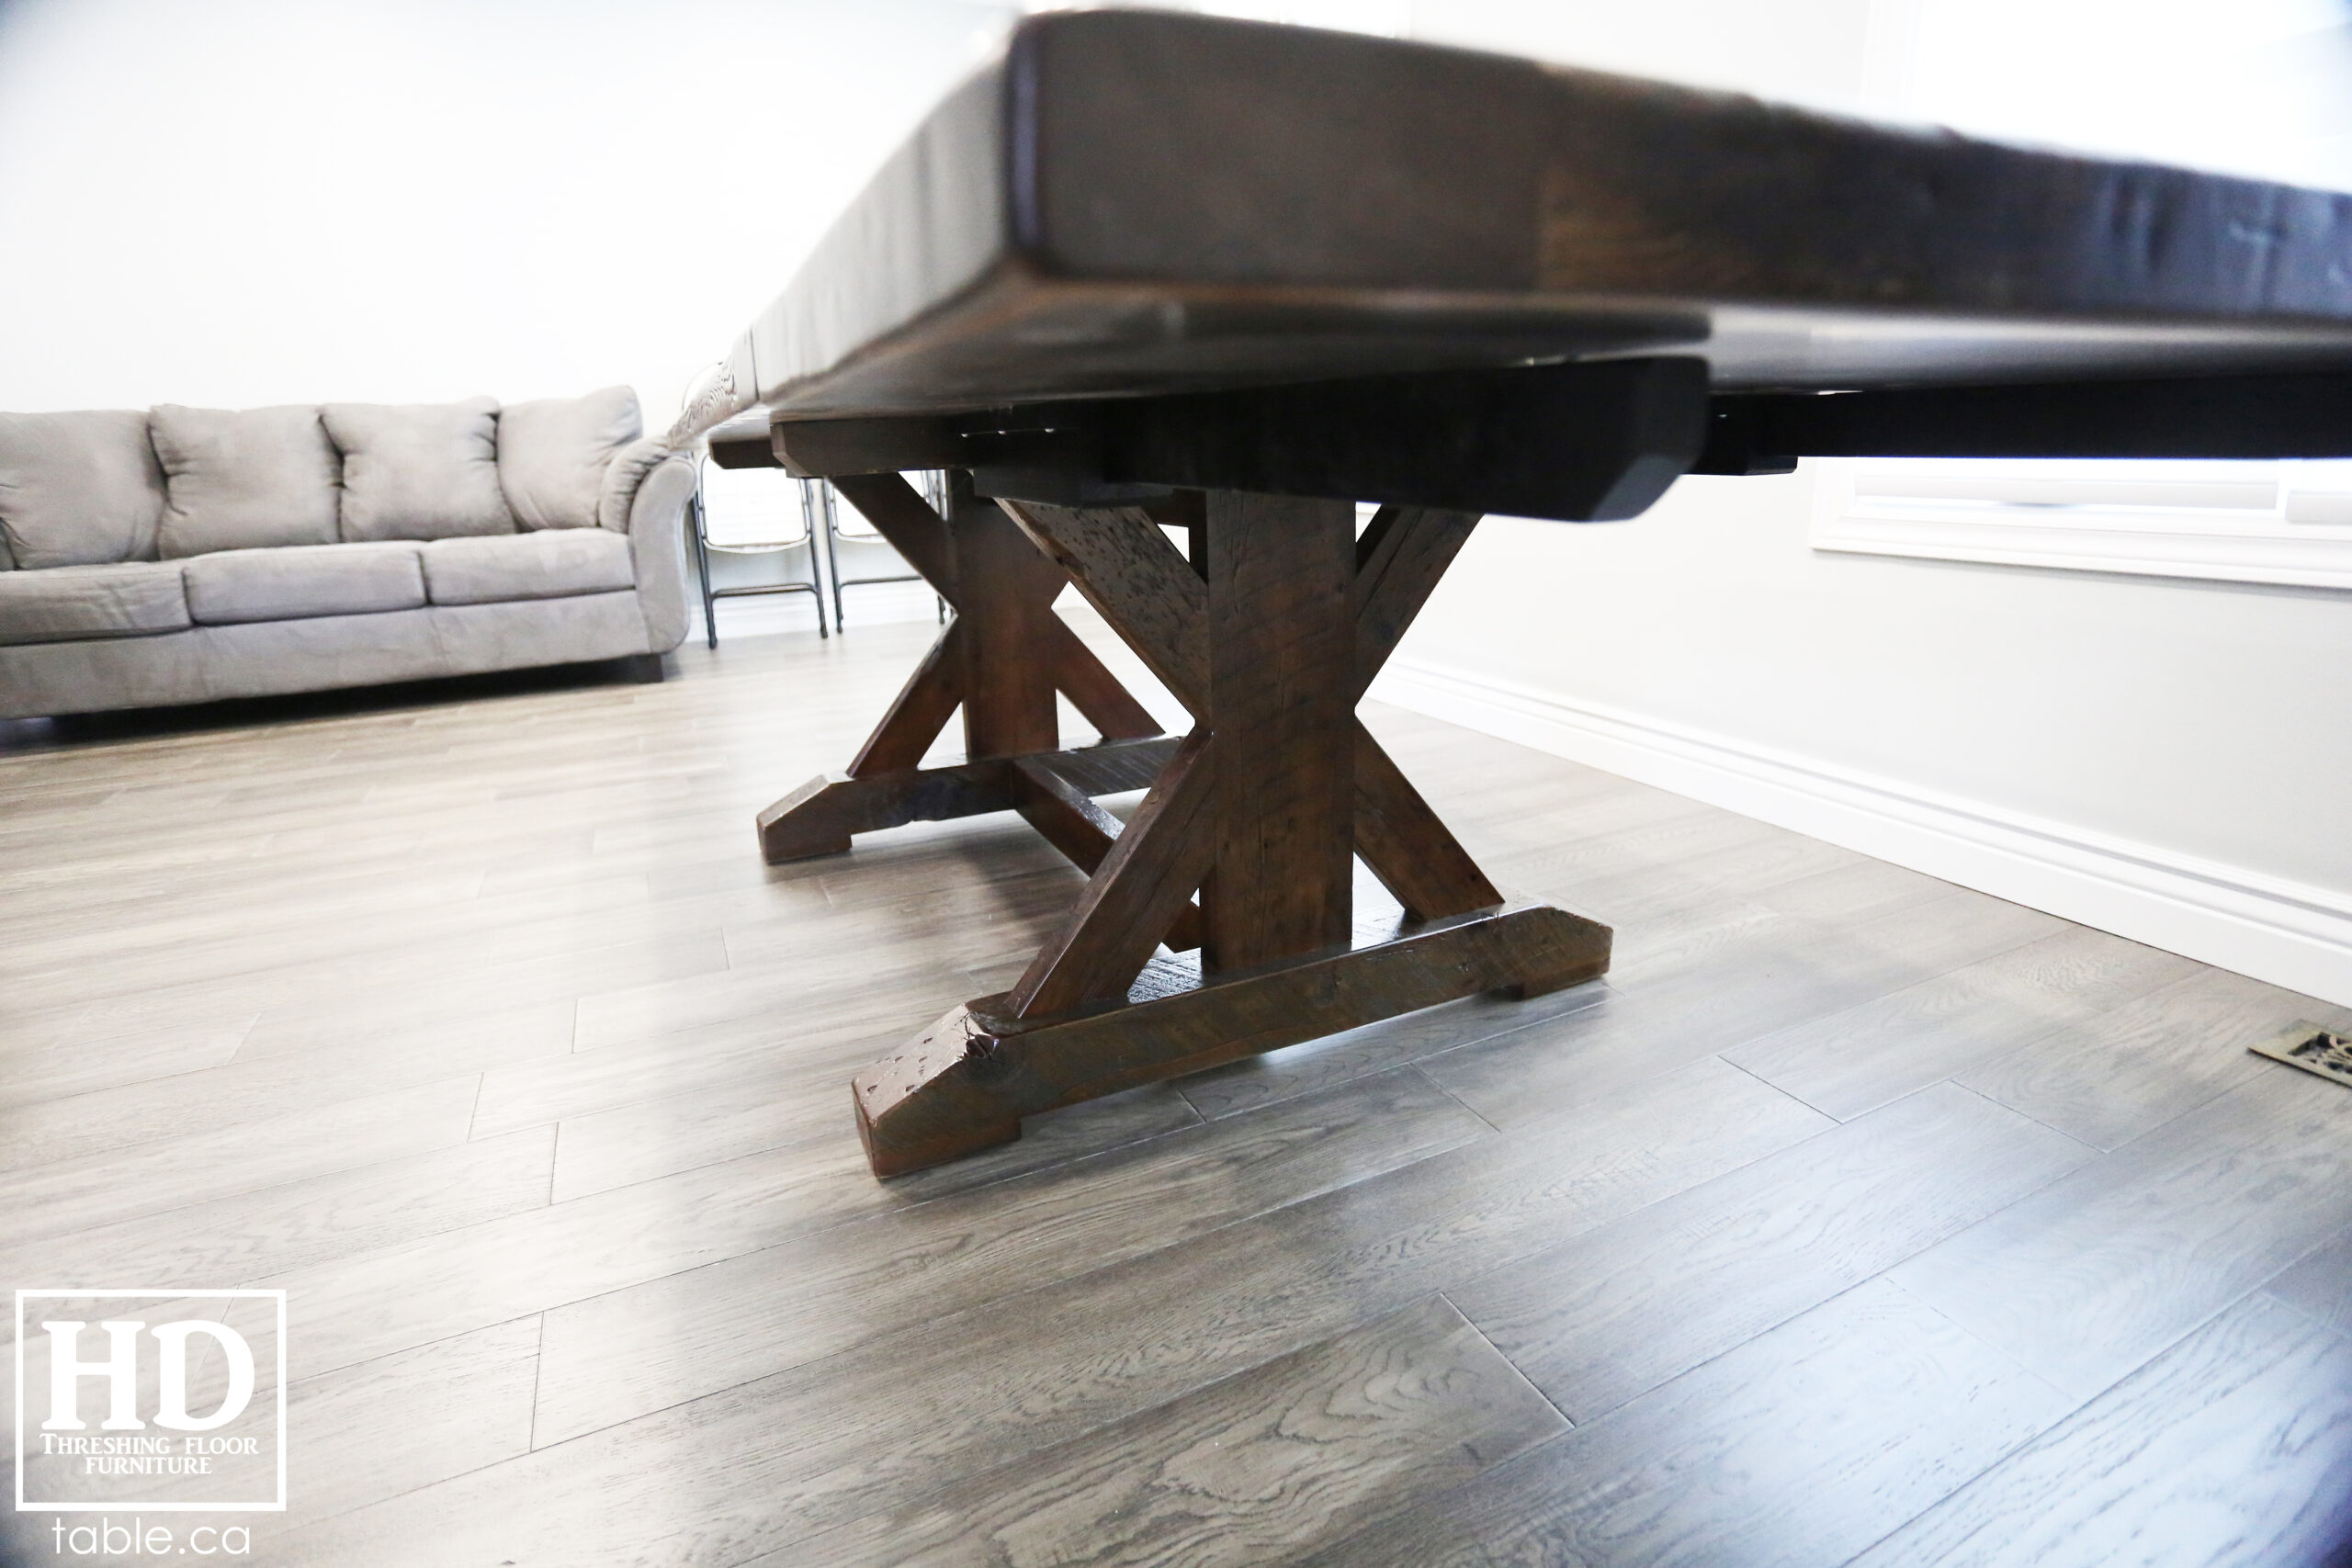 Dark Reclaimed Wood Table with Black Stain Treatment by HD Threshing Floor Furniture / www.table.ca